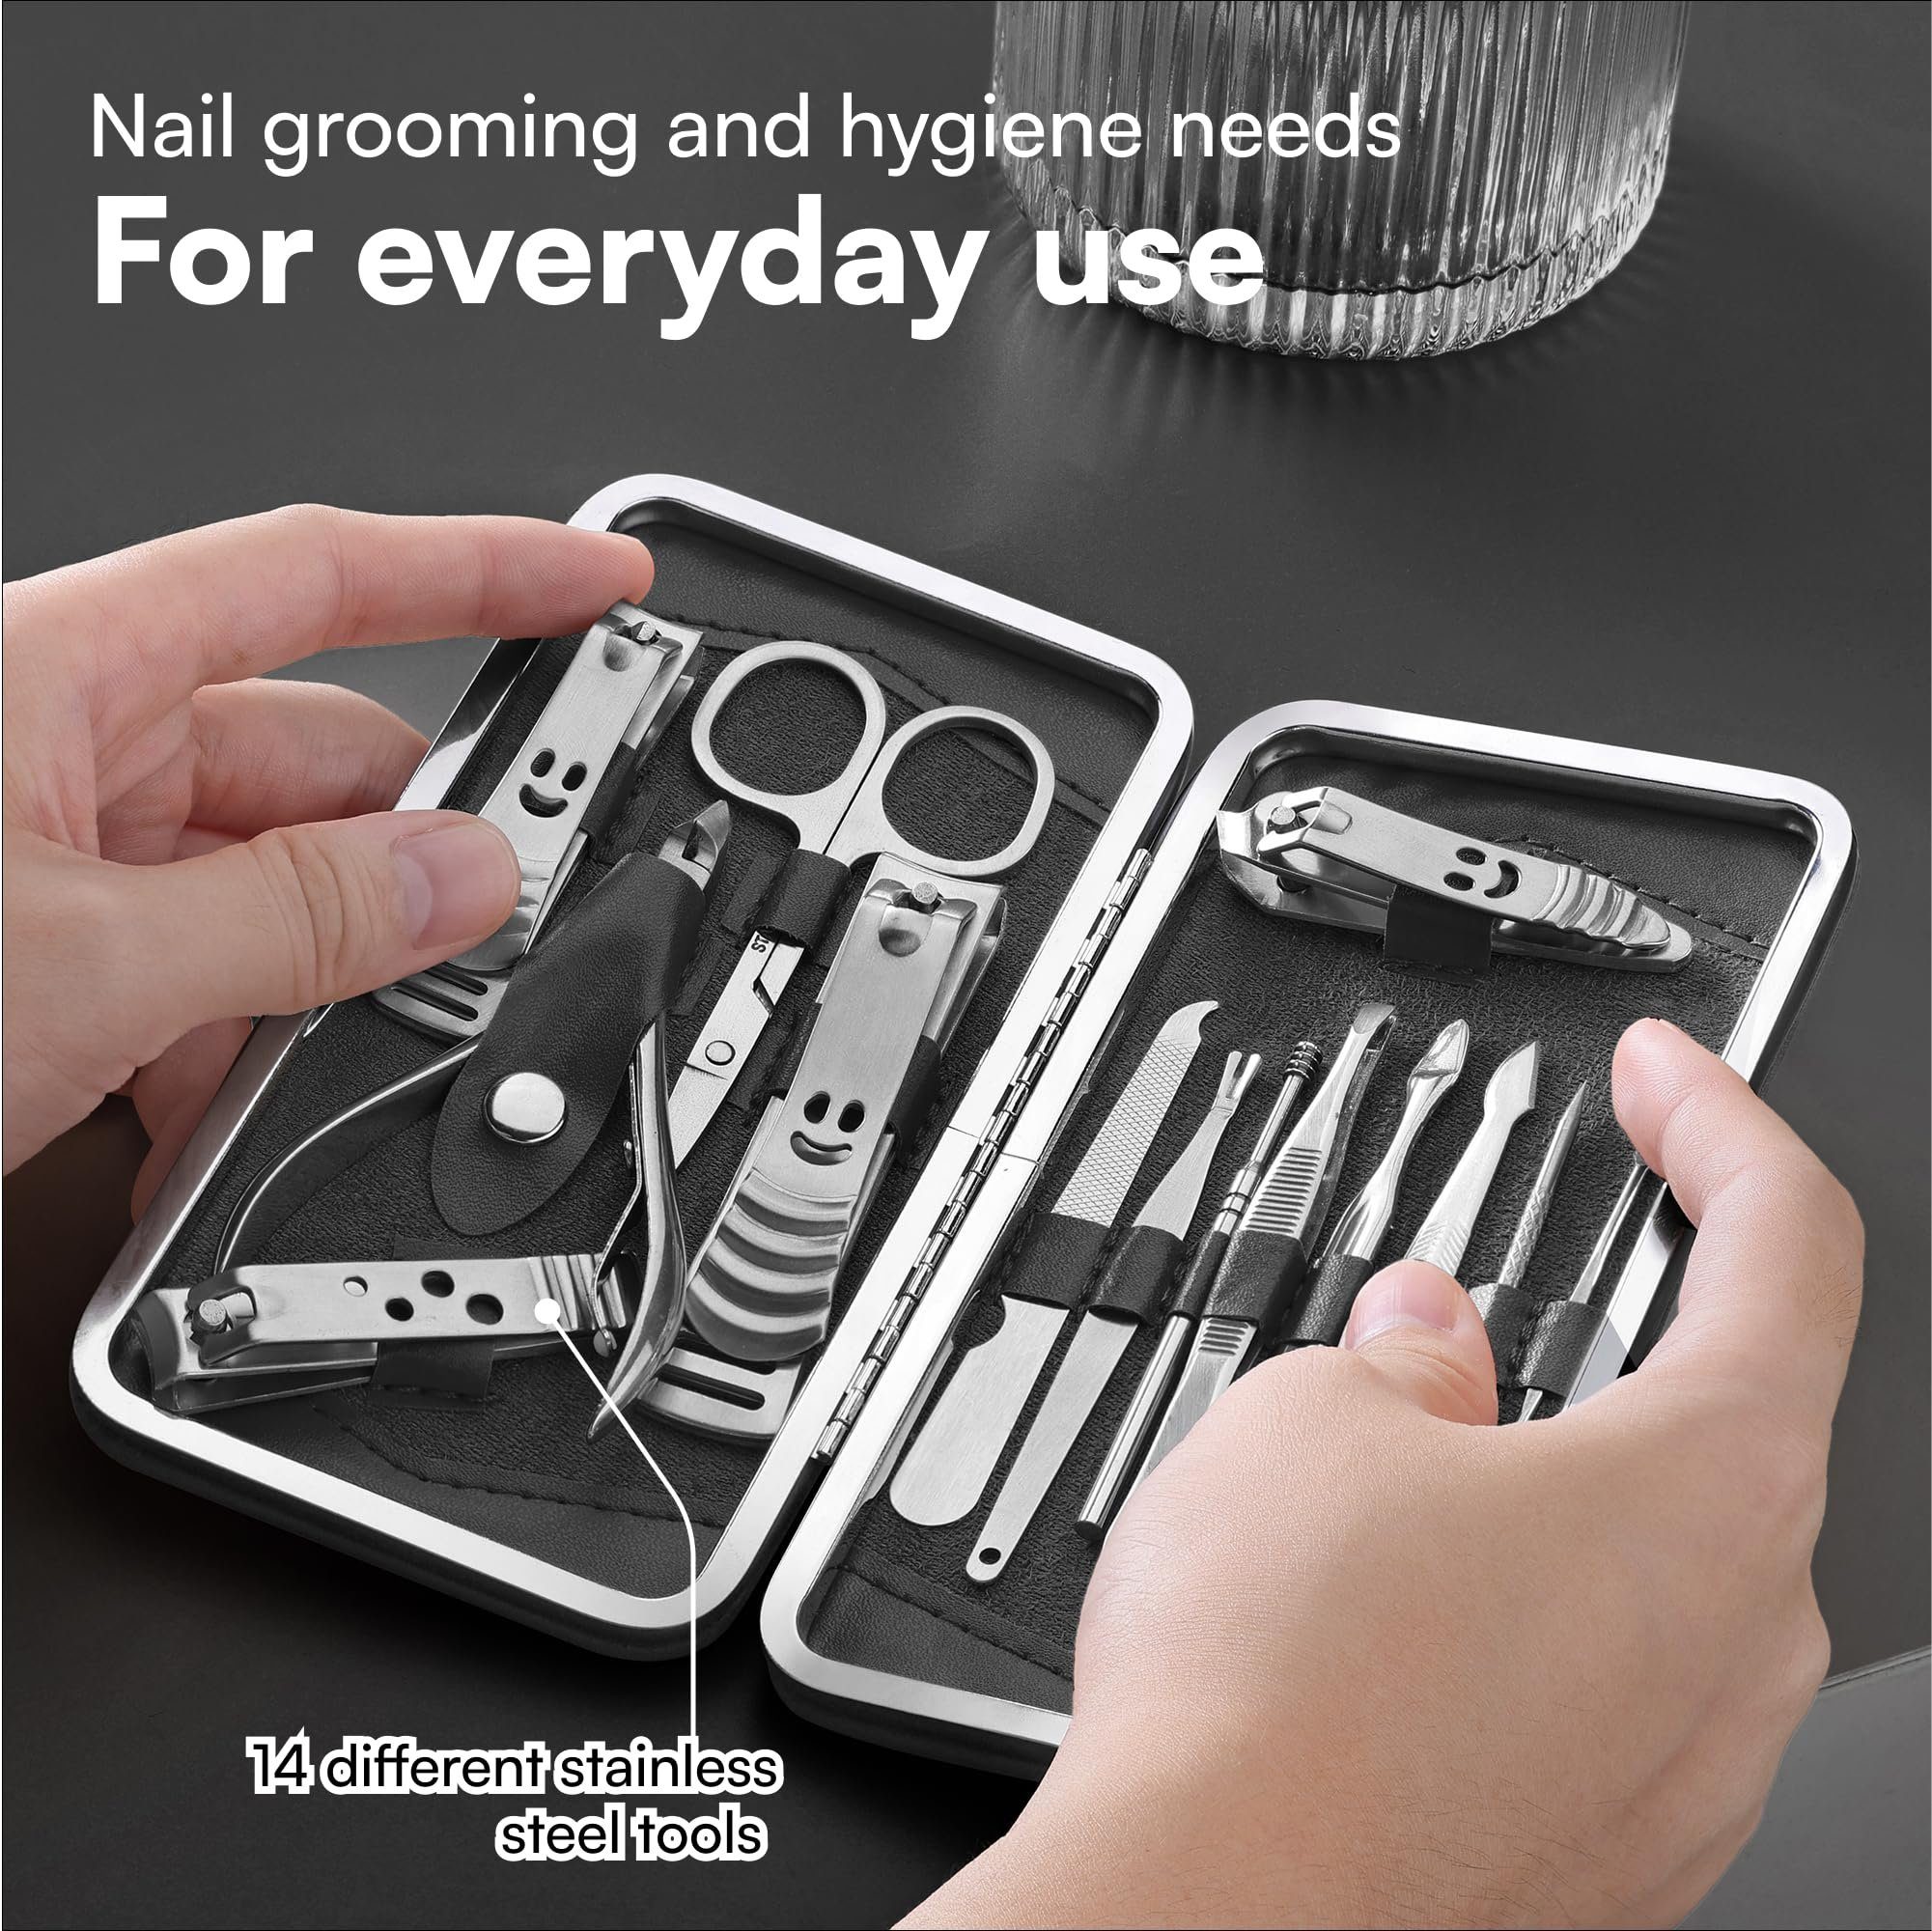 H&S Nagelknipser Nail Set_Black Clippers Manicure